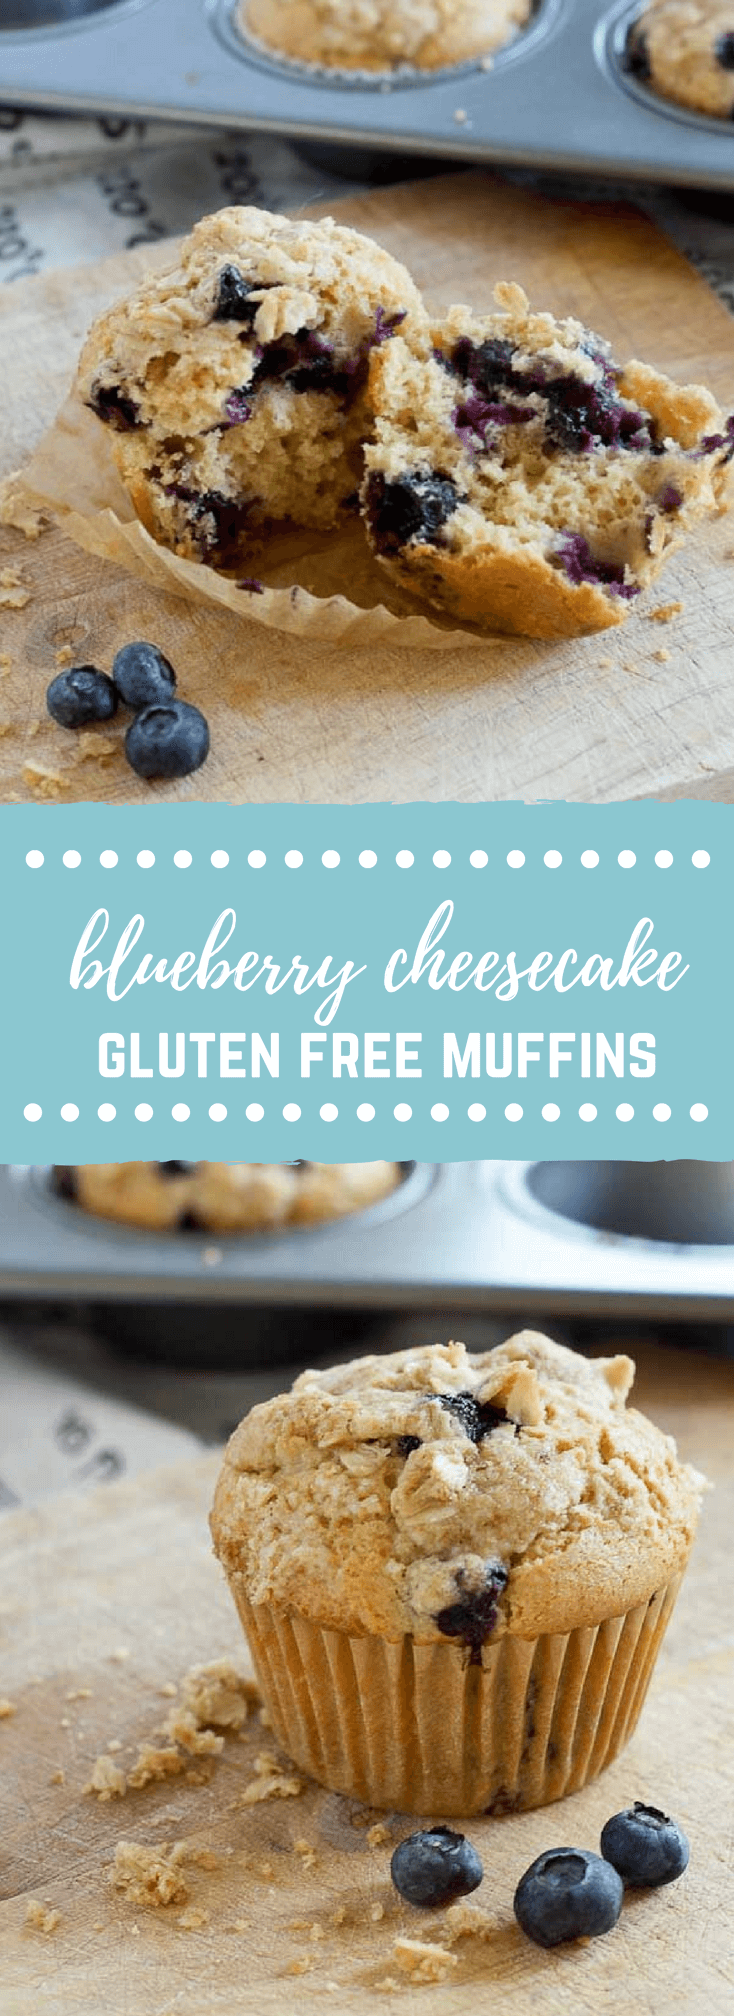 These Blueberry Cheesecake Muffins with Oatmeal Streusel Topping are protein-packed cottage cheese and made with fresh blueberries for a better-for-you gluten free blueberry muffin!